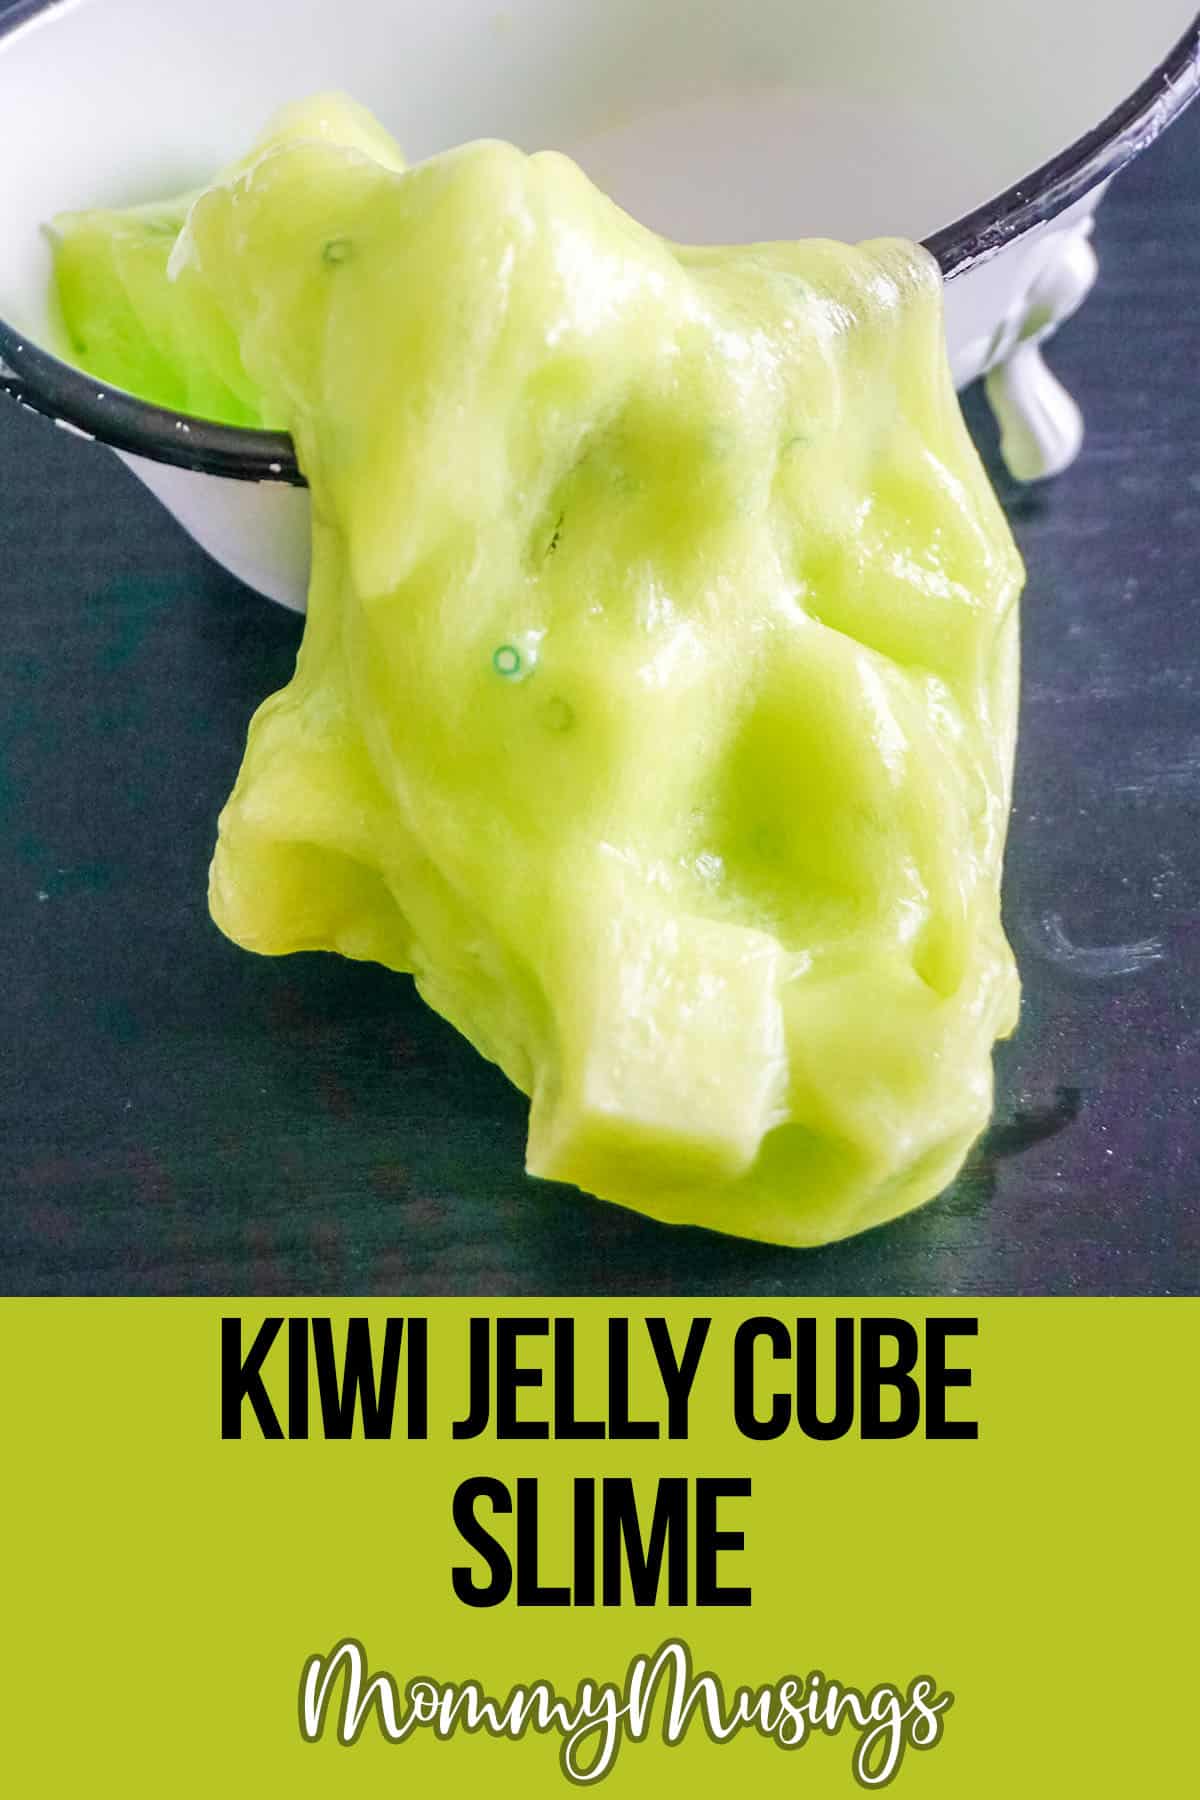 kiwi slime spilling onto a table with text which reads kiwi jelly cube slime